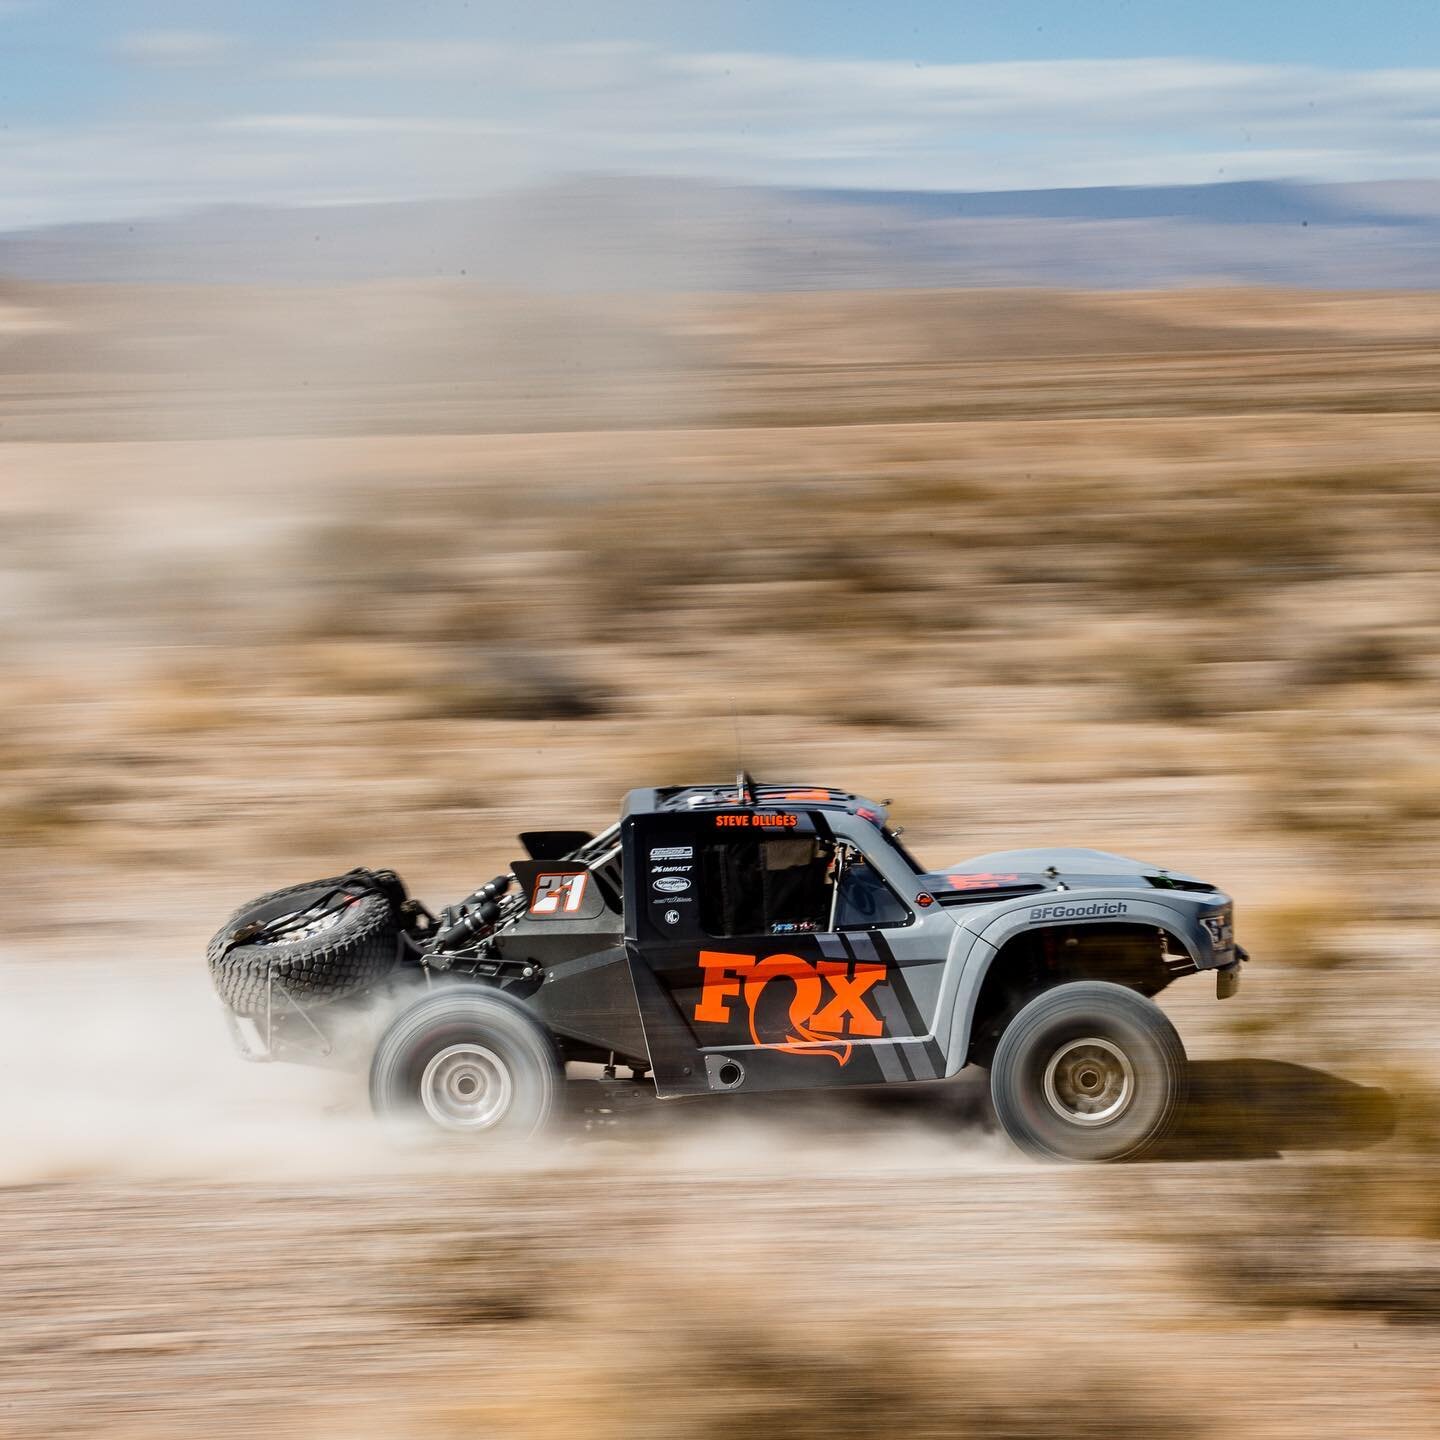 ALOT of off-road photos inbound. Not sorry about it⚡️ #MINT400 @fox